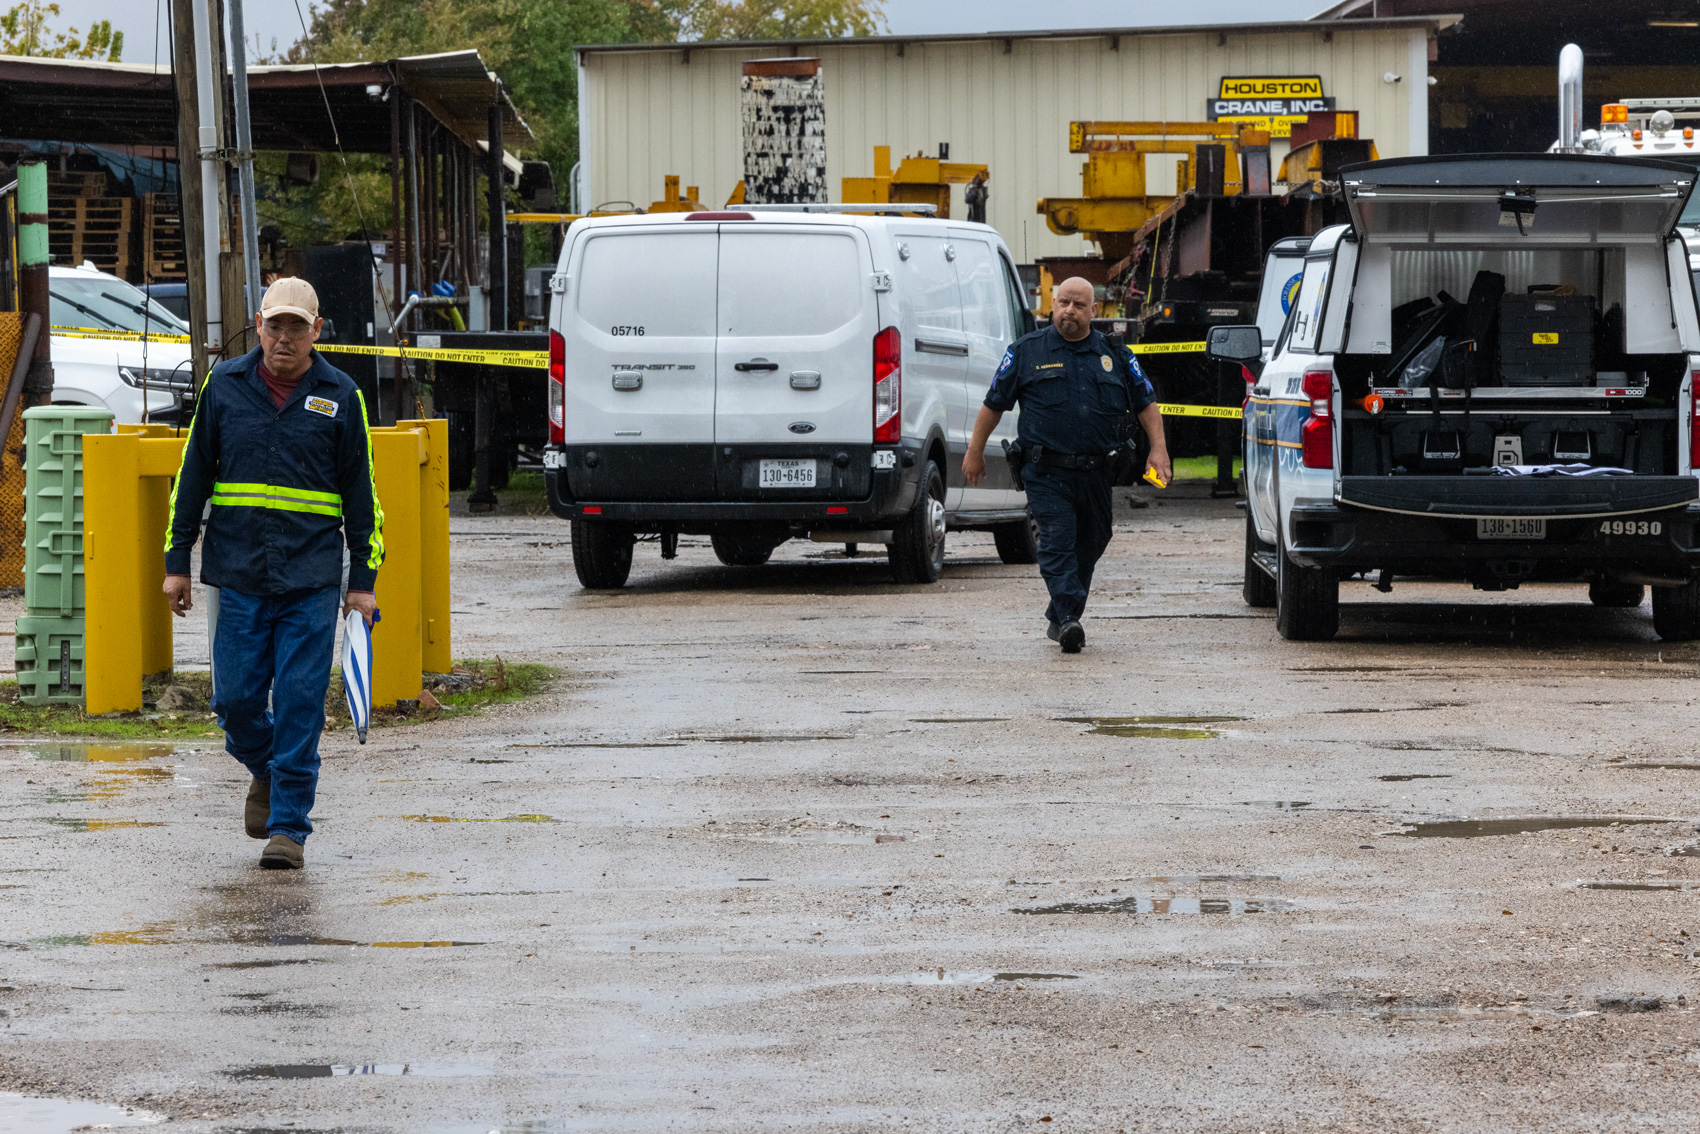 An officer and employee walk out of the back of Houston Crane, Inc. where a man was shot by police after a string of carjackings.